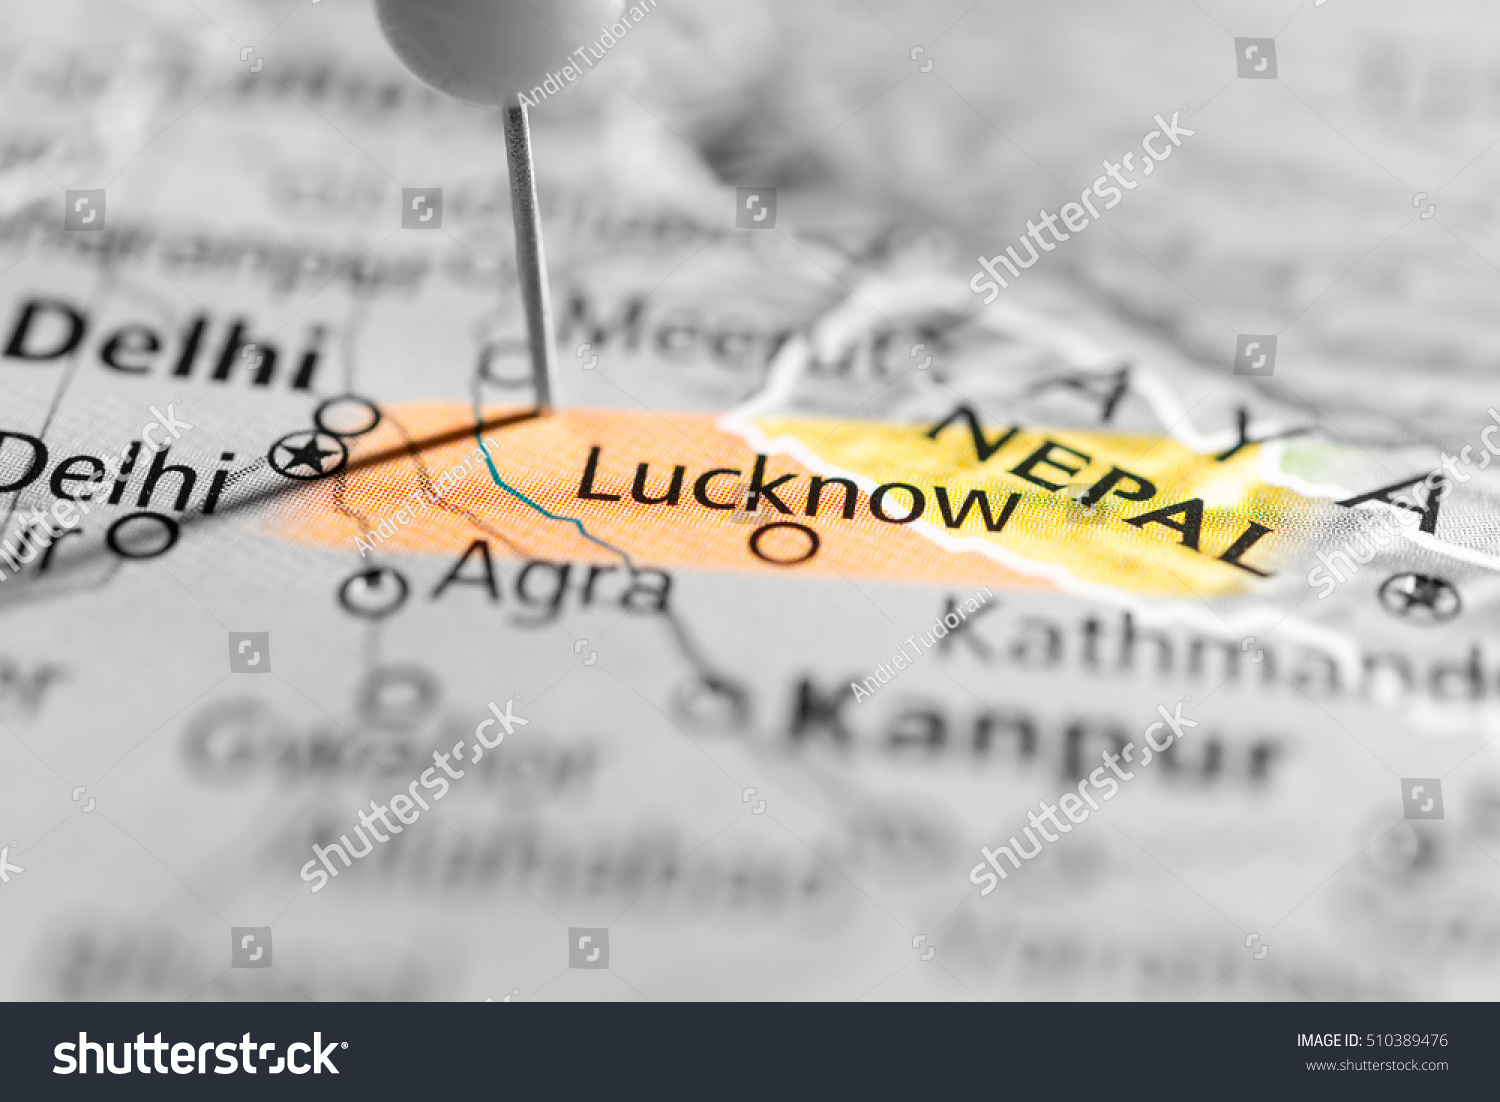 Lucknow, India. Stock Photo 510389476 : Shutterstock